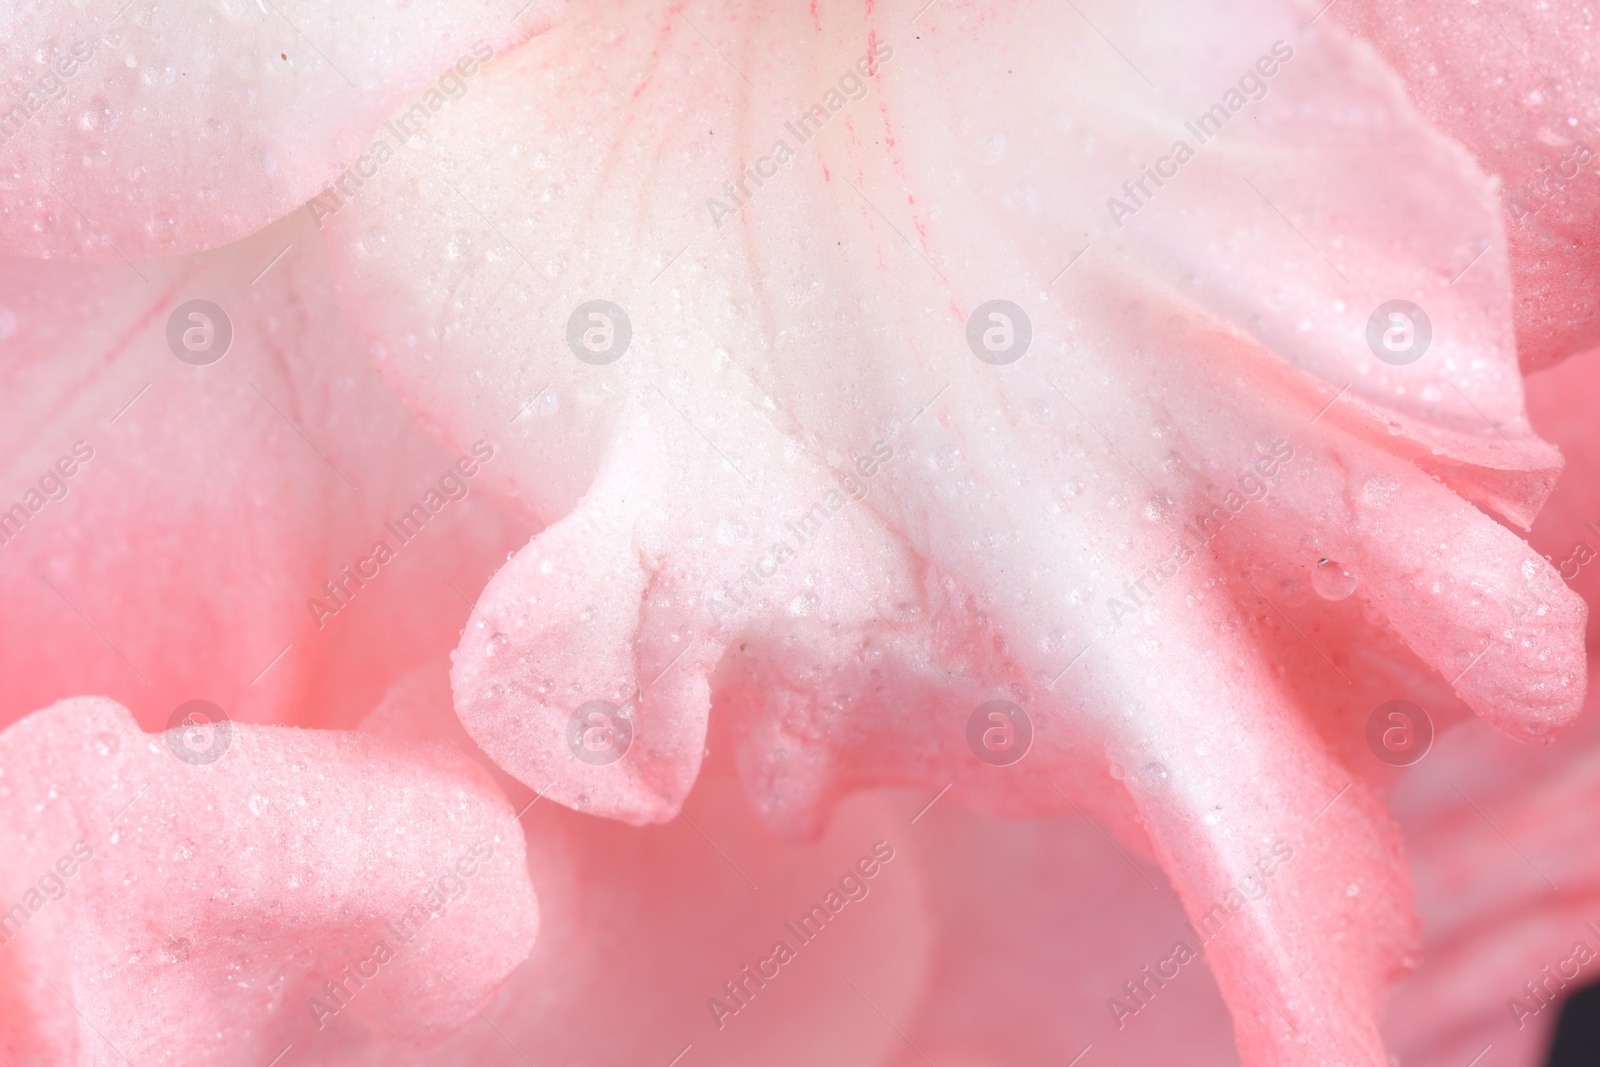 Photo of Beautiful pink gladiolus flower with water drops as background, macro view